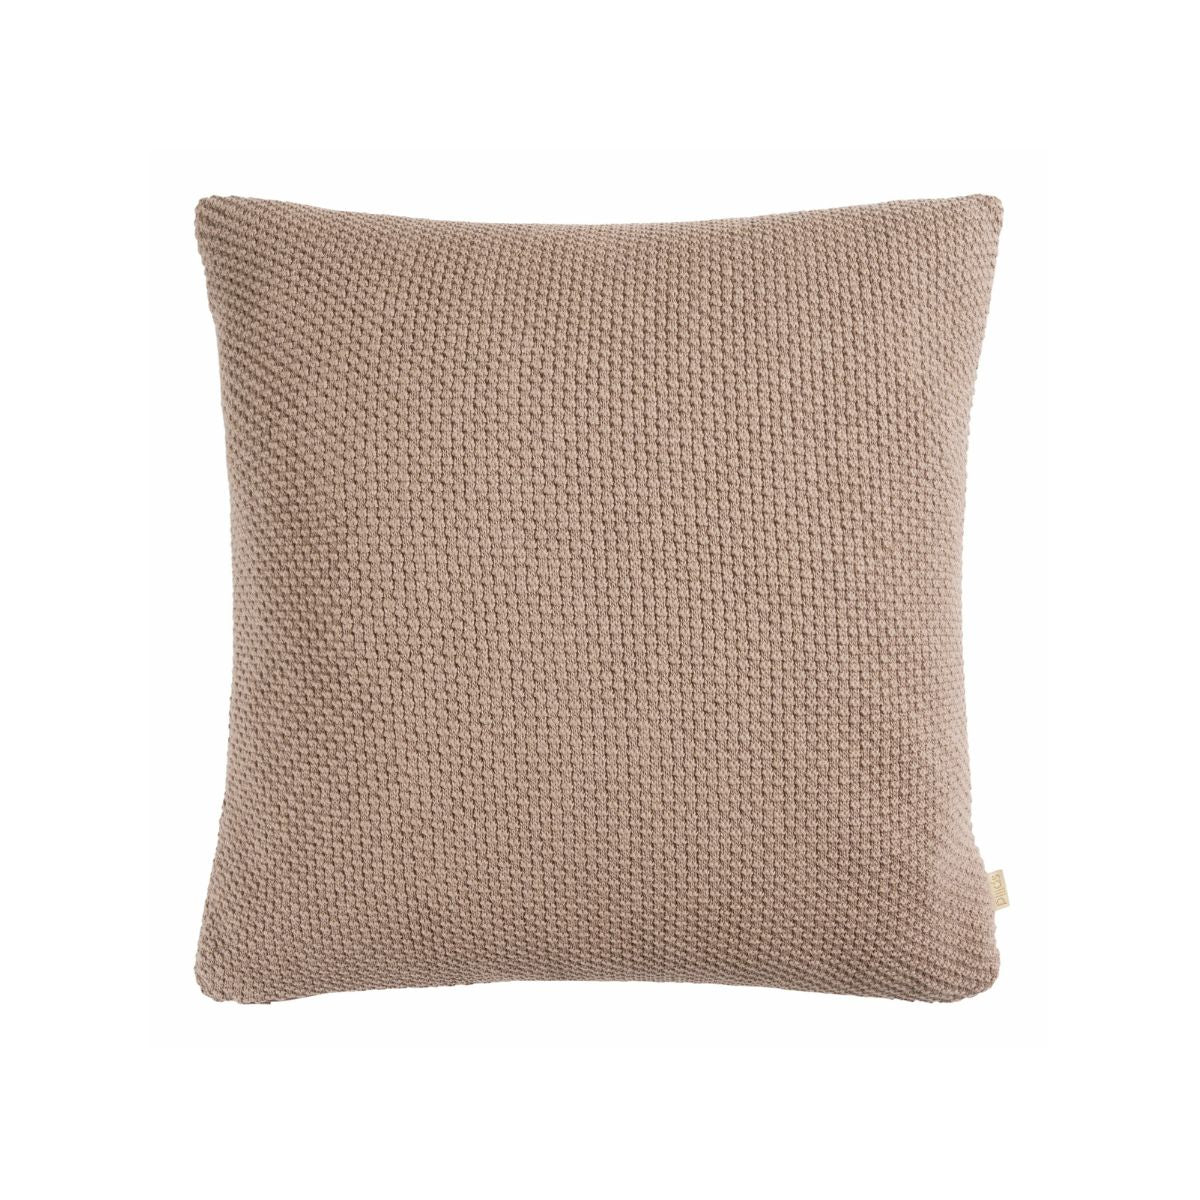 Nora - Coussin couleur terre